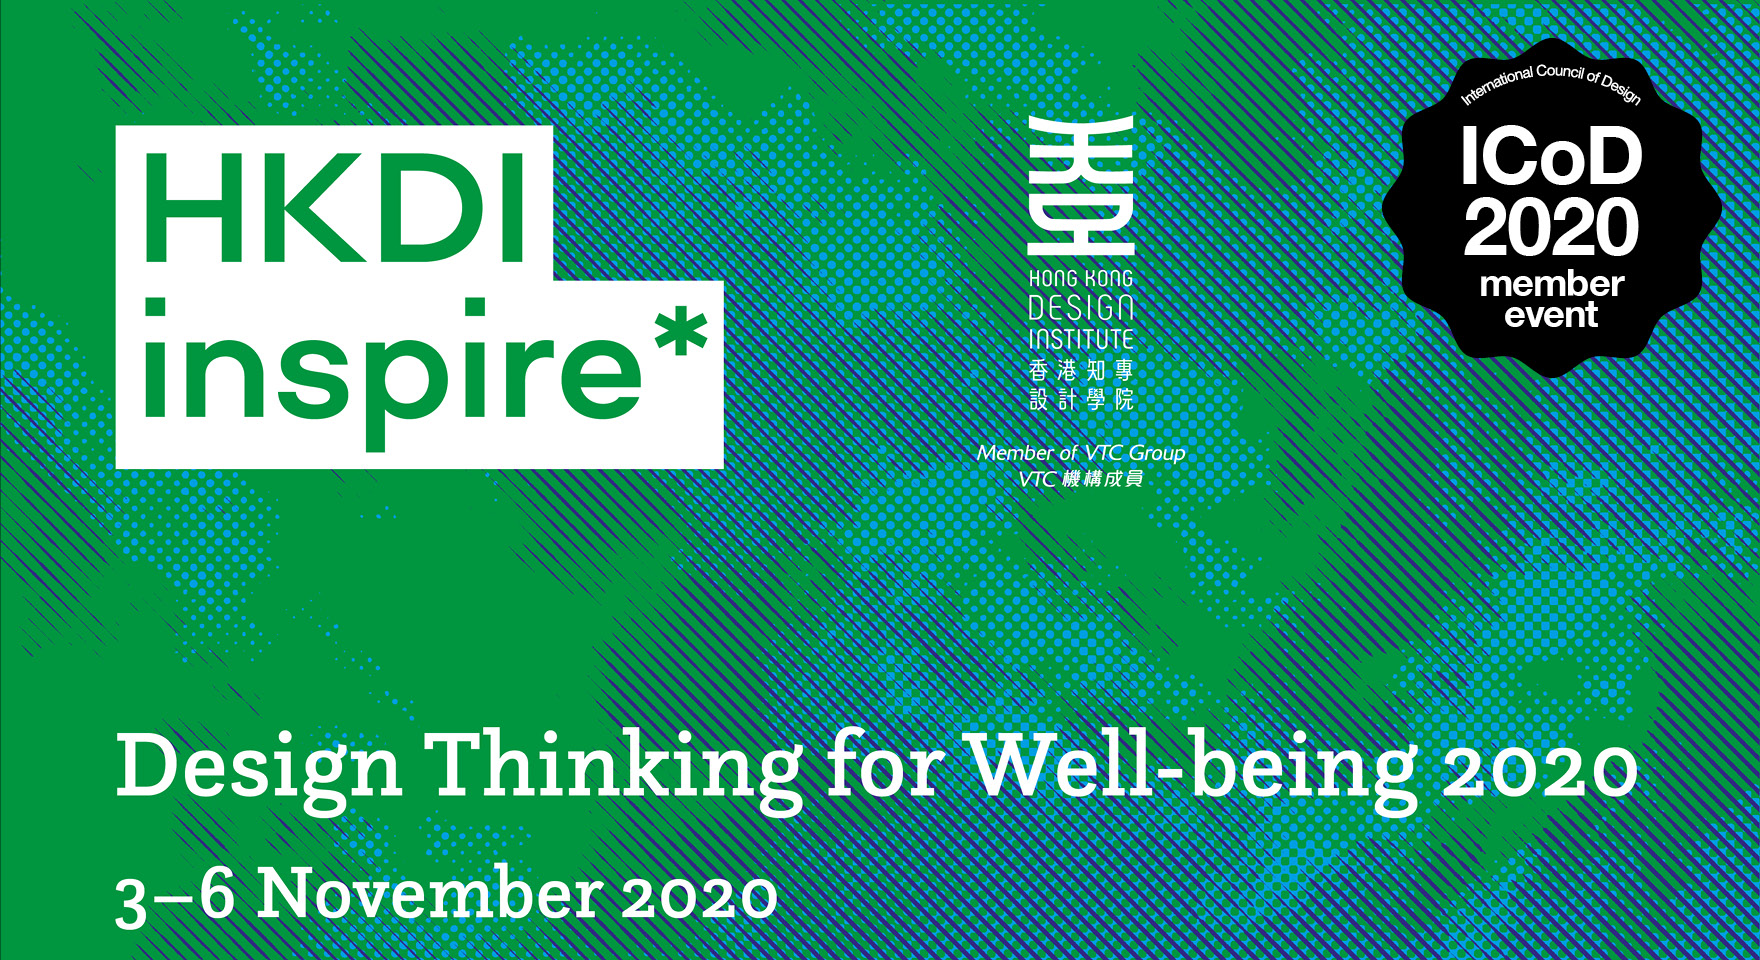 HKDI inspire*: design thinking for well-being 2020